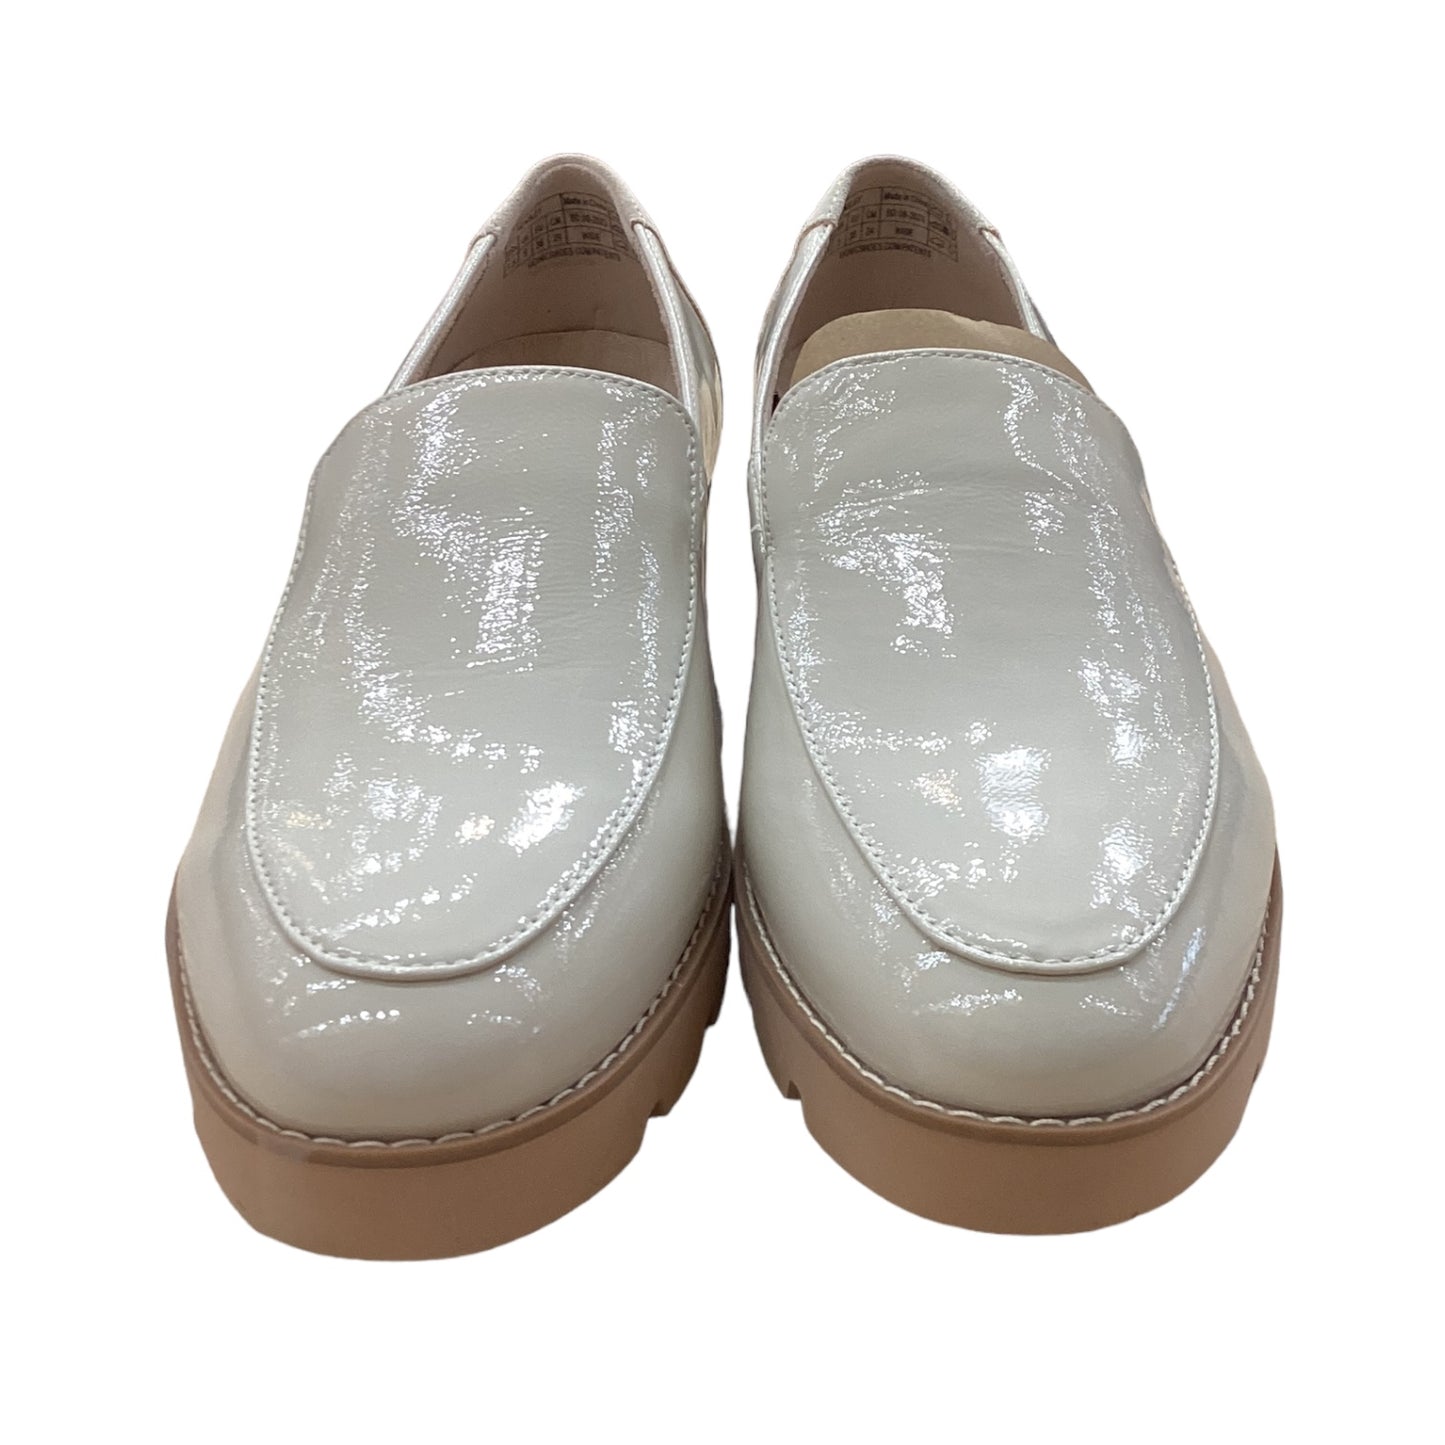 Shoes Flats Oxfords & Loafers By Vionic  Size: 7.5